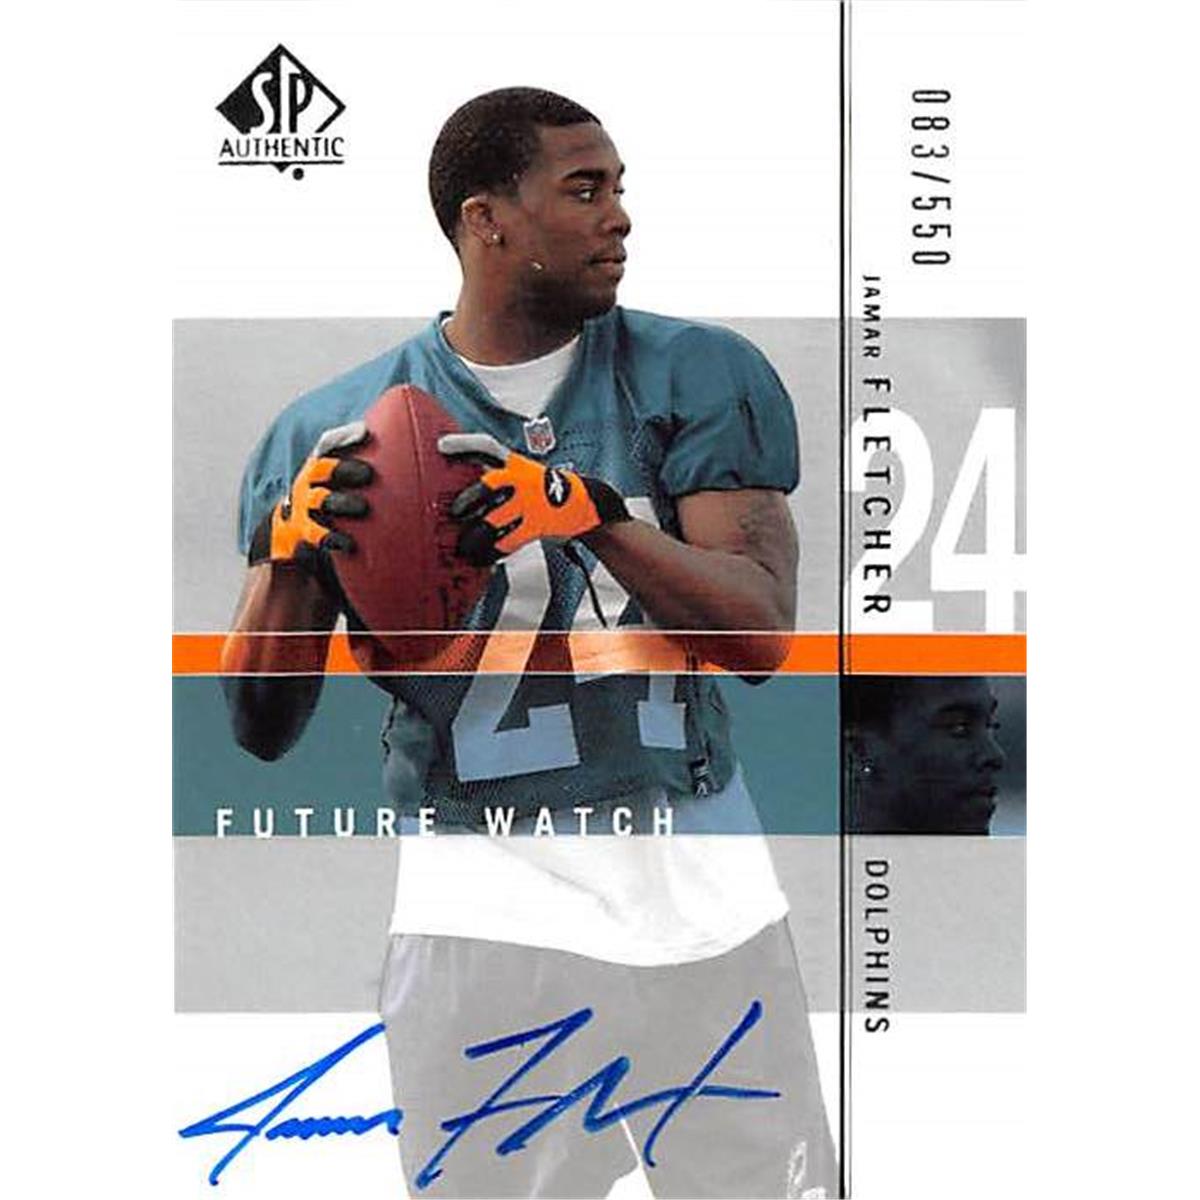 Picture of Autograph Warehouse 366583 Jamar Fletcher Autographed Football Card - Miami Dolphins 2001 Upper Deck Future Watch No.135